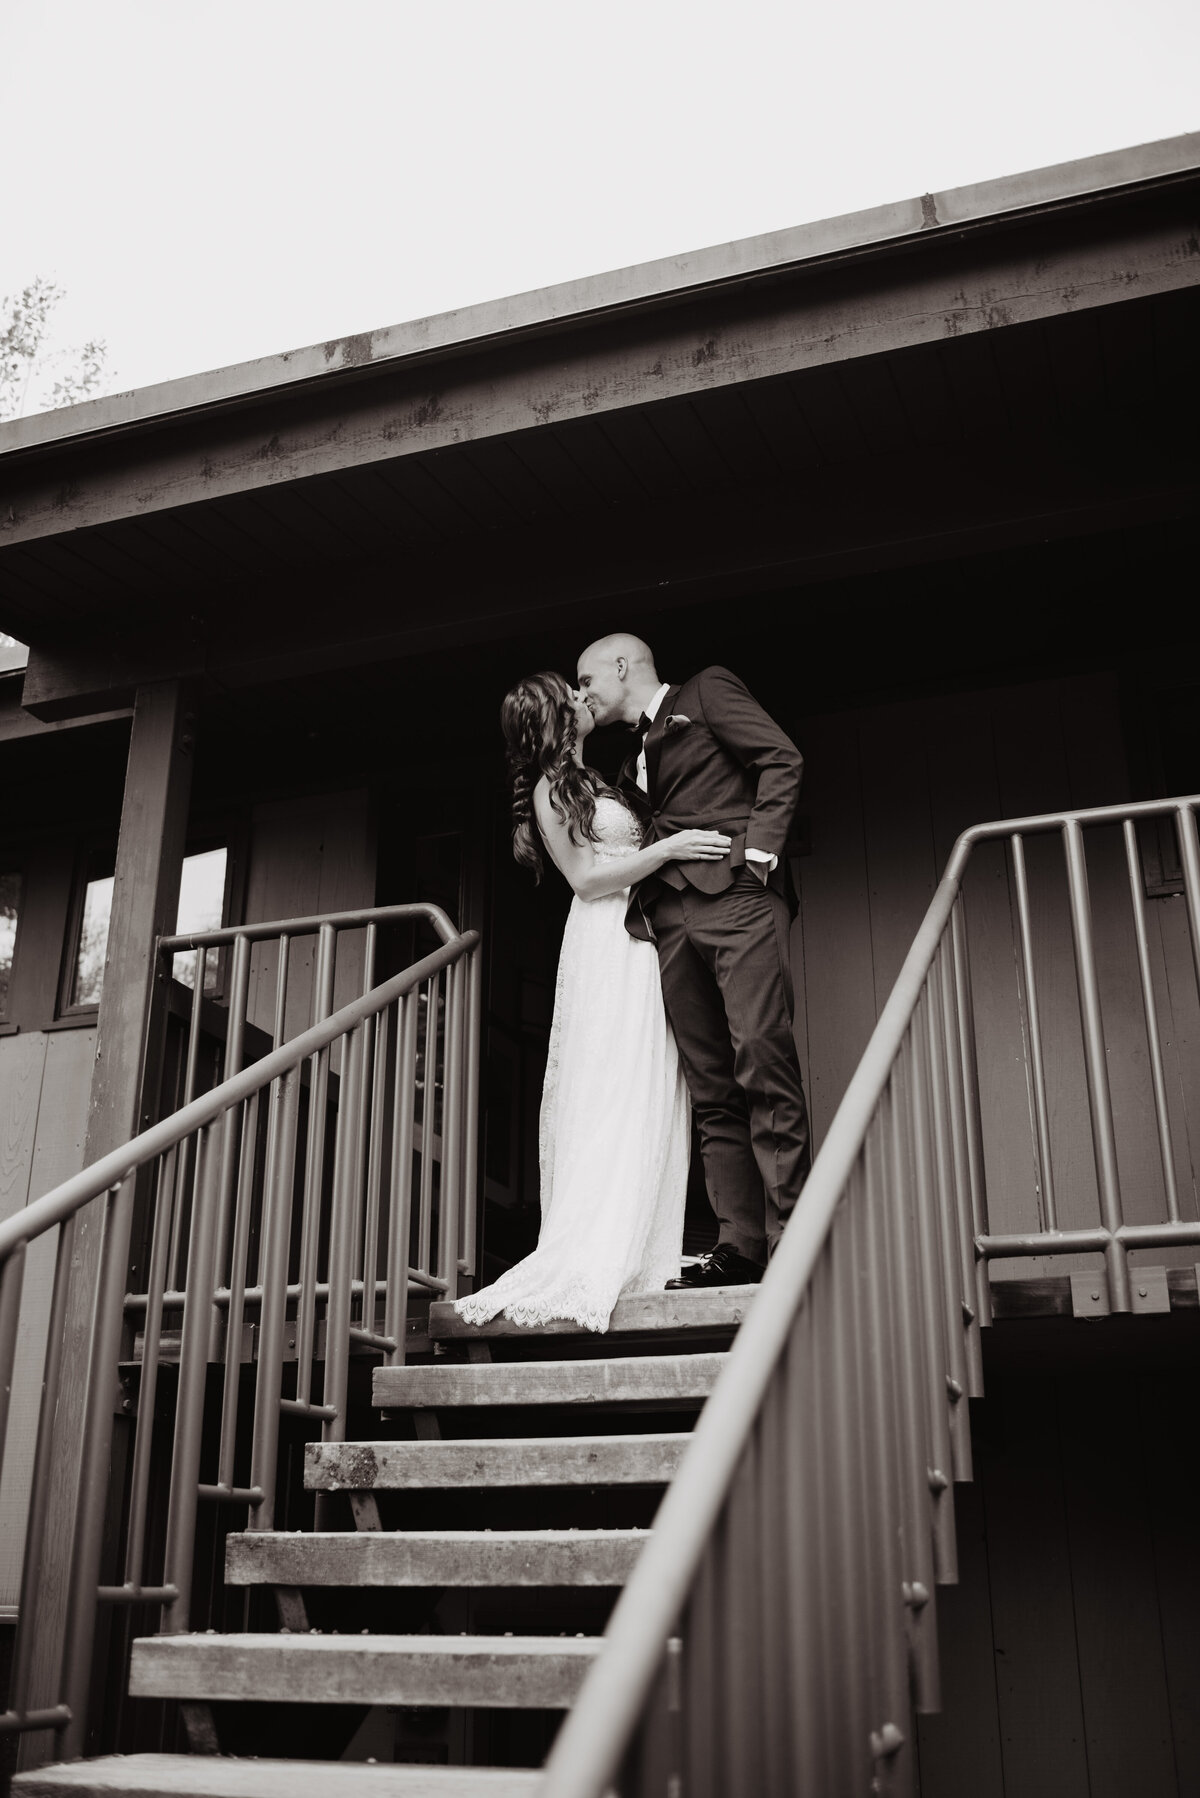 Jackson Hole photographers capture bride and groom kissing before walking down stairs